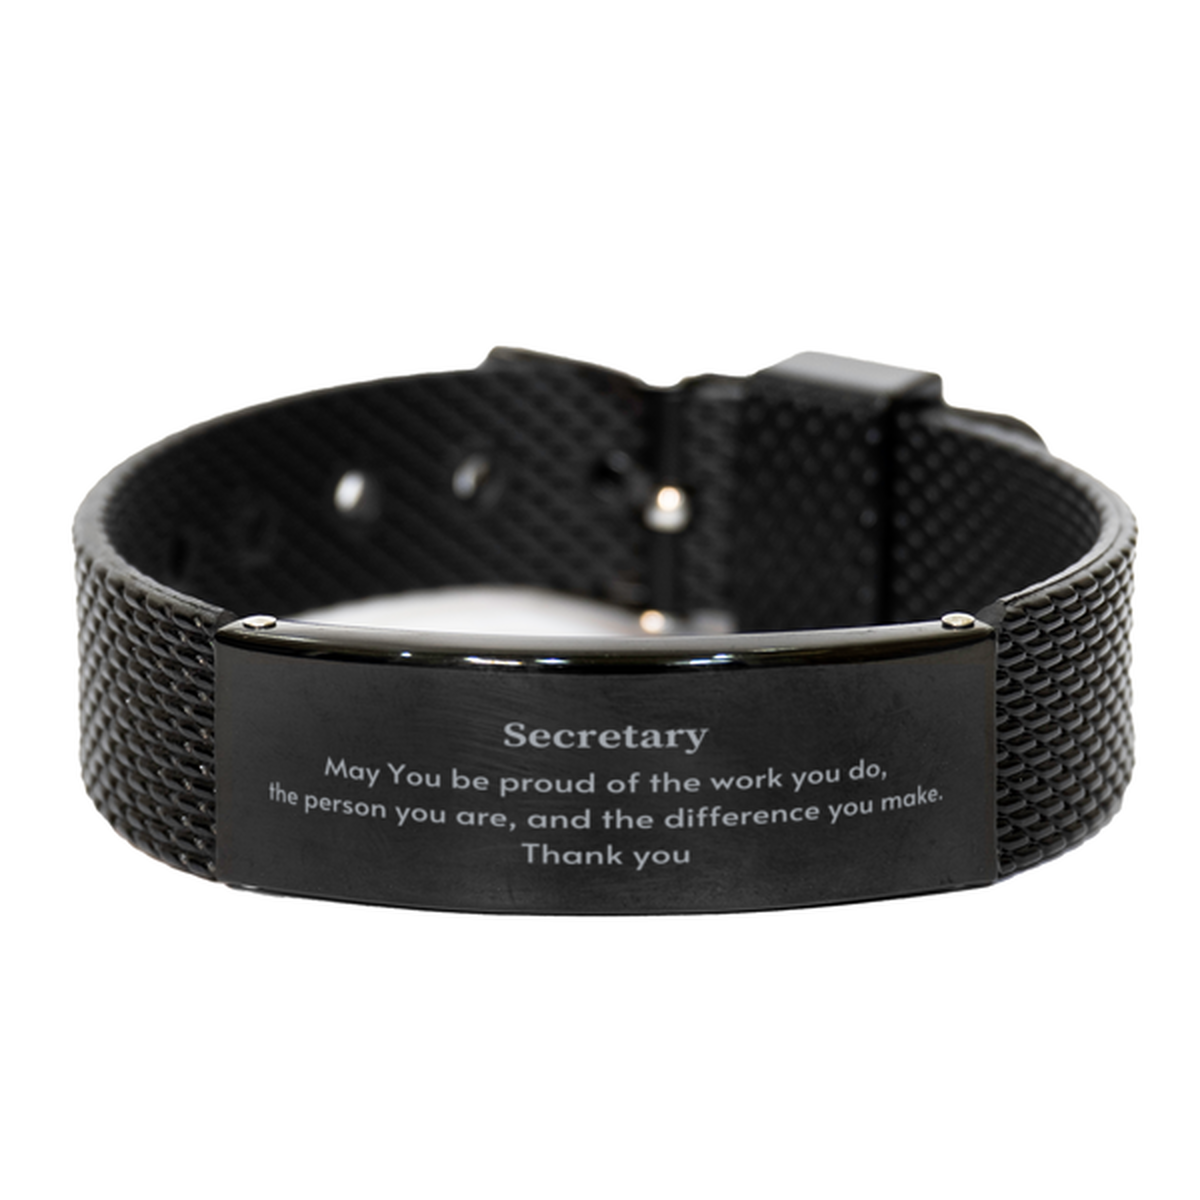 Heartwarming Black Shark Mesh Bracelet Retirement Coworkers Gifts for Secretary, Secretary May You be proud of the work you do, the person you are Gifts for Boss Men Women Friends